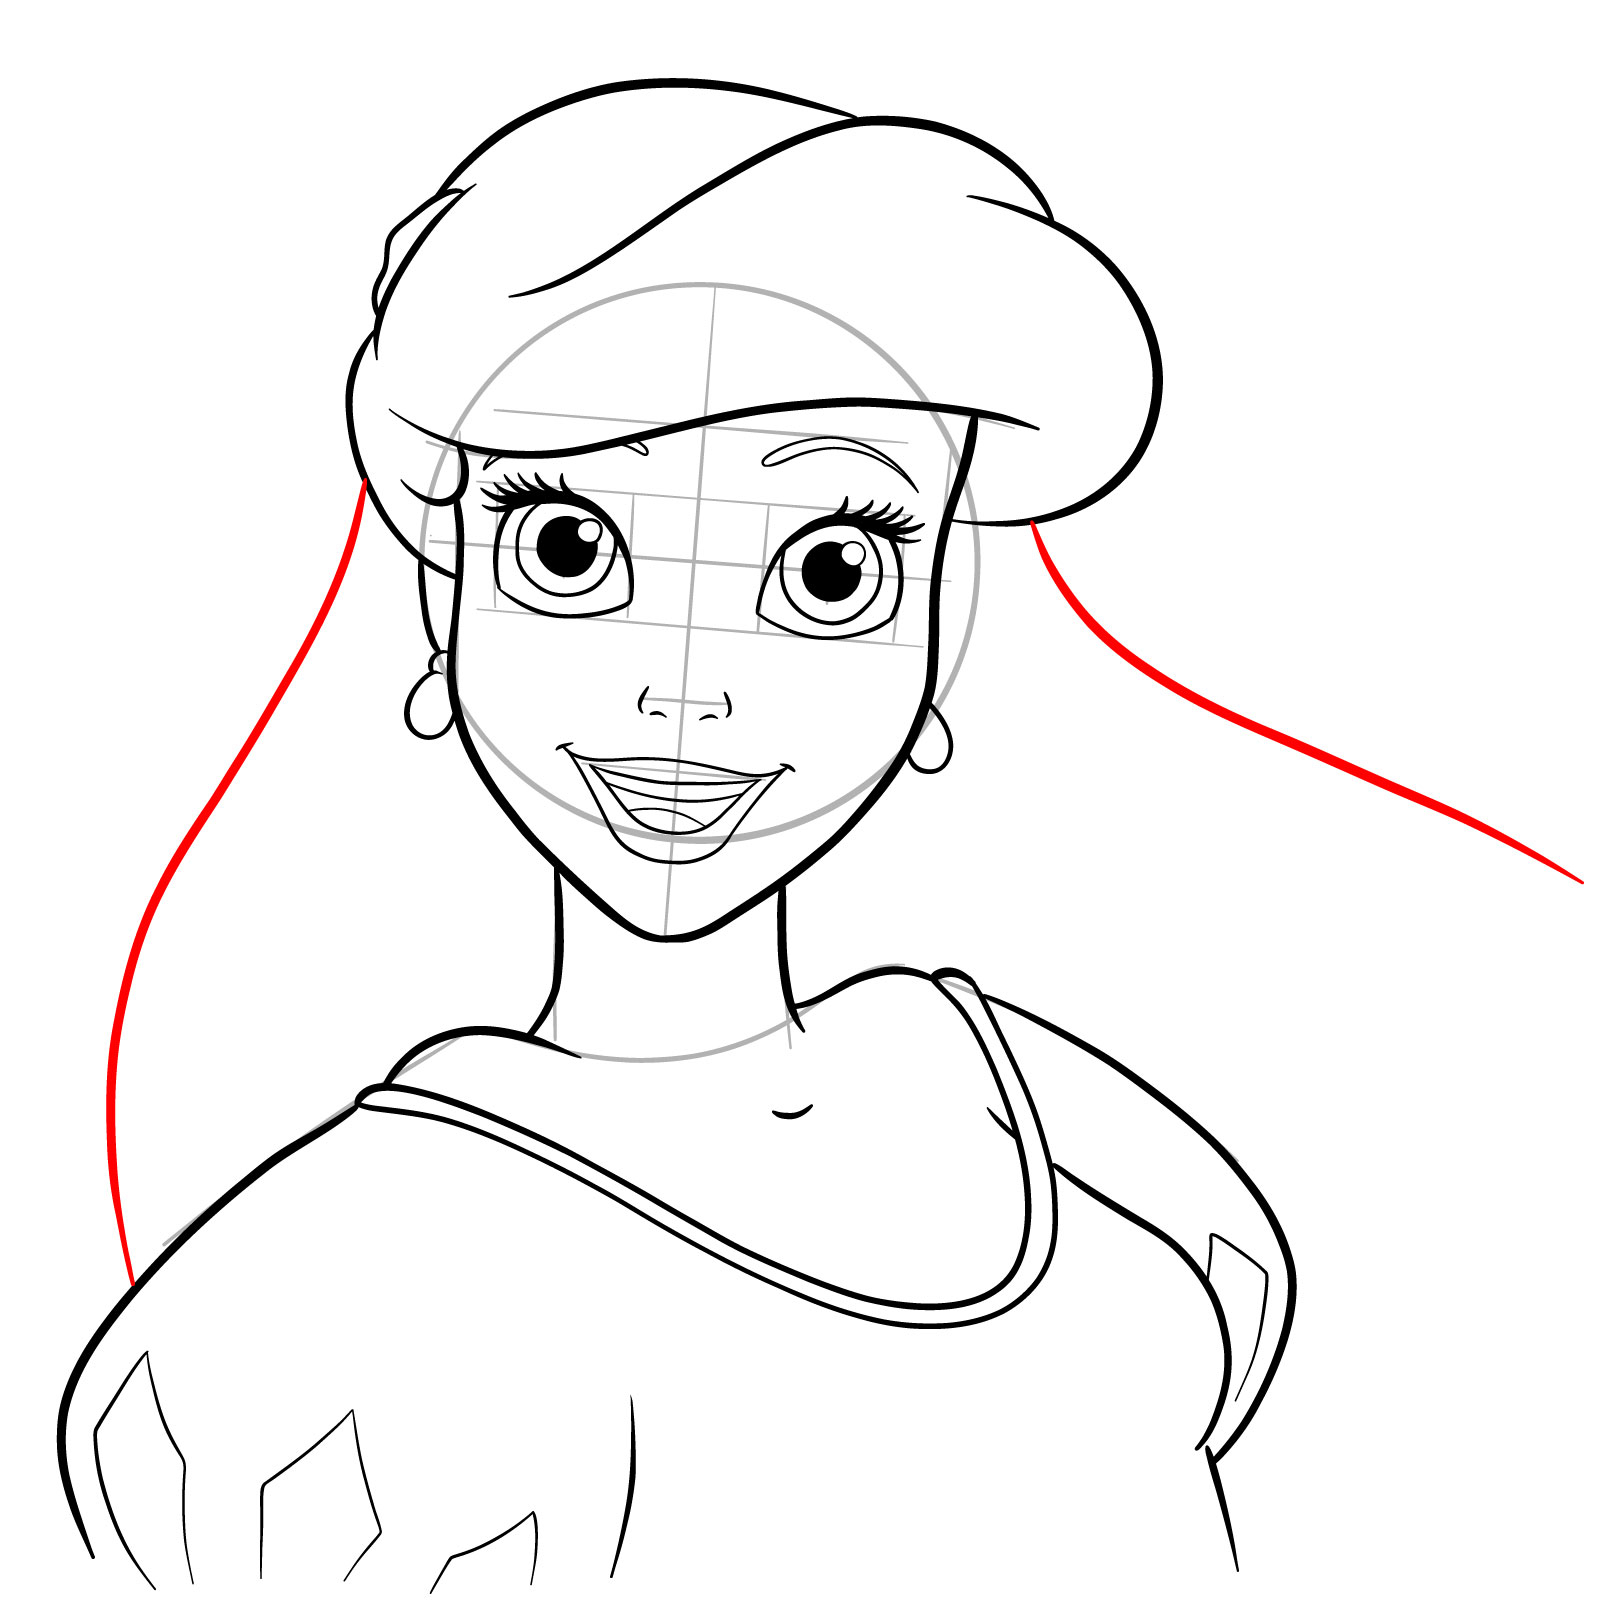 How to draw Ariel's face - The Little Mermaid - step 27